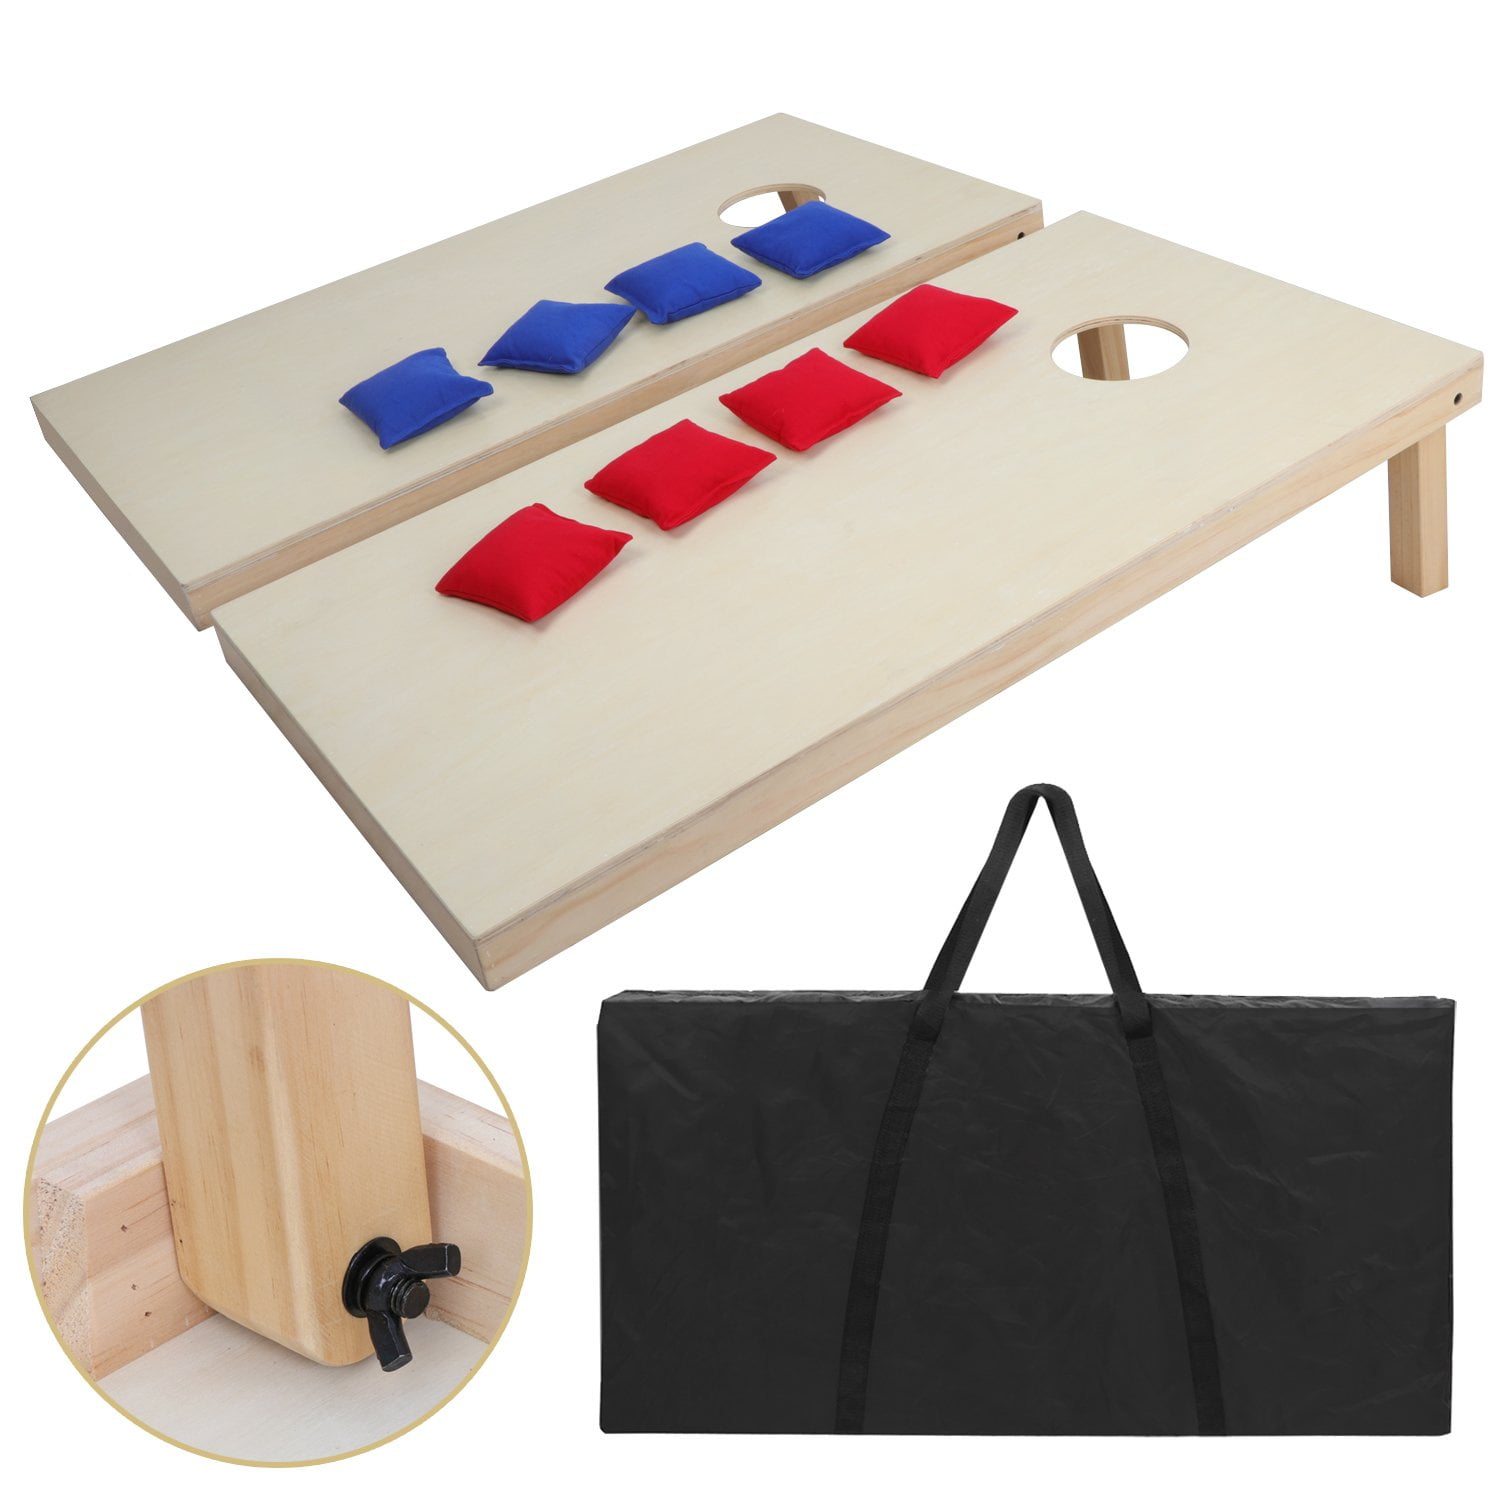 Great for Indoor & Outdoor Play Wood Designs FDYD Solid Wood Premium Corn hole Set ean Bag Toss Game with 8 Bean Bags 